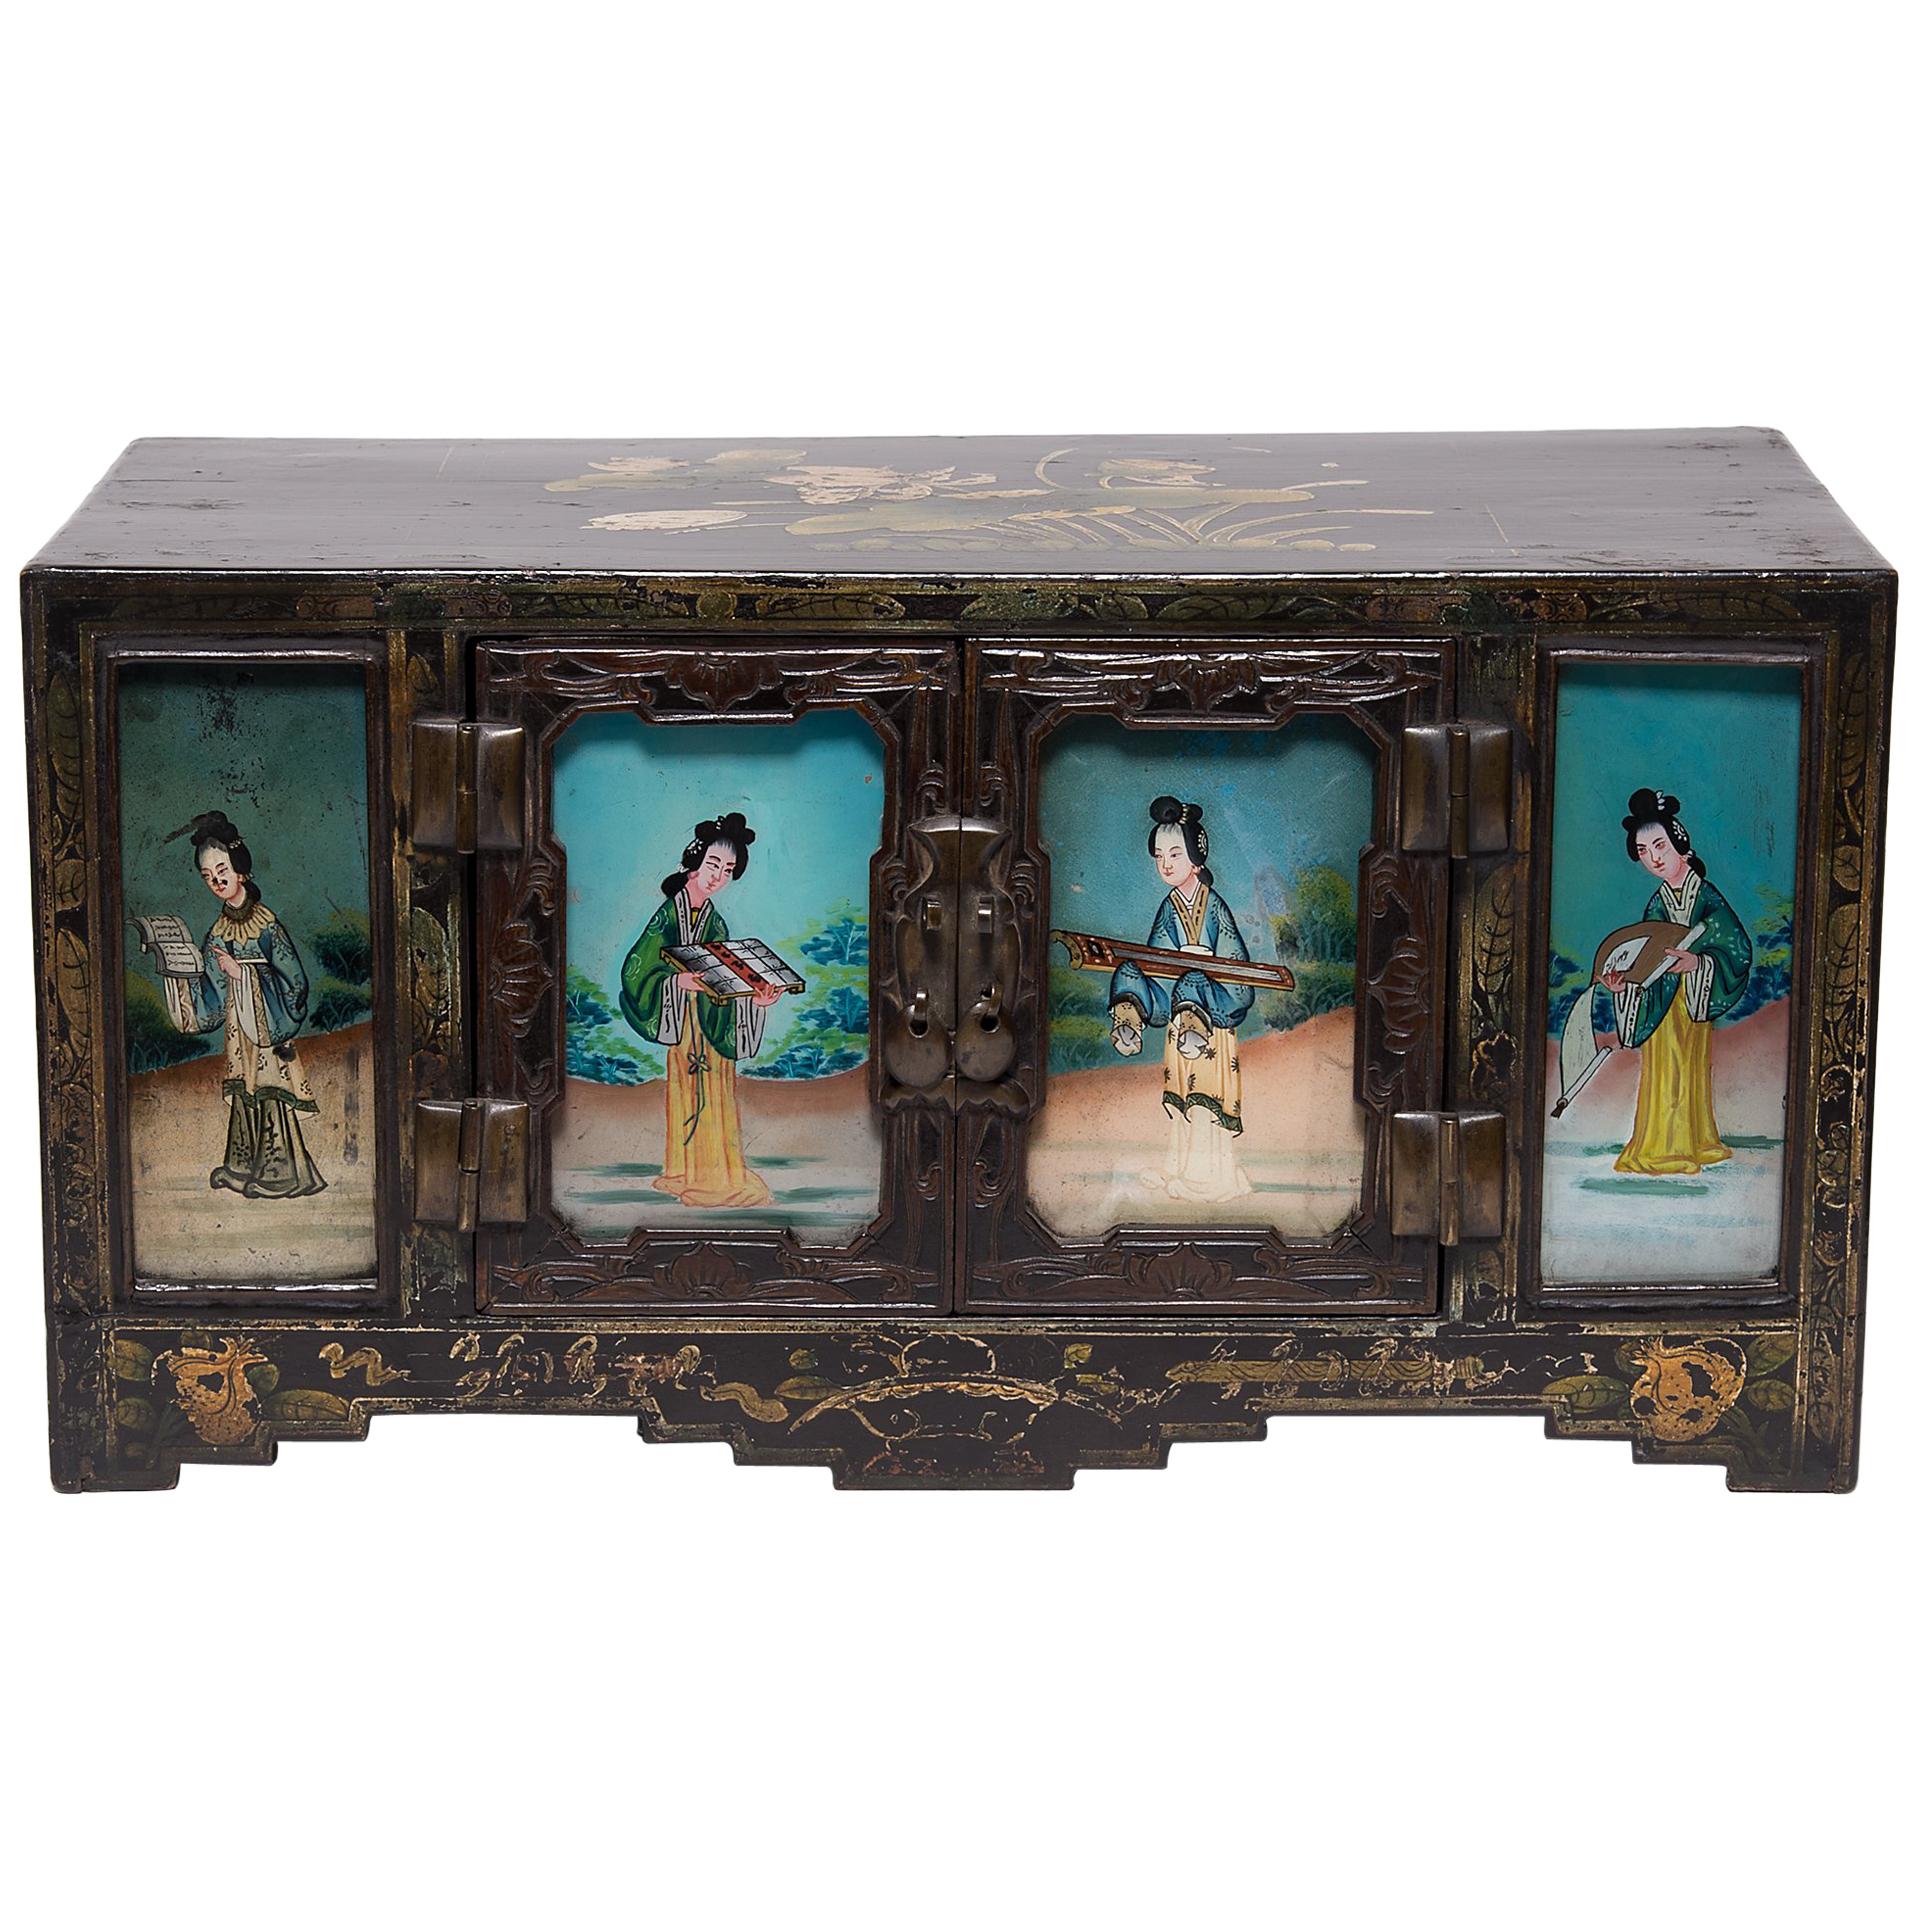 Chinese Treasure Chest with Reverse Glass Painted Panels. c. 1850